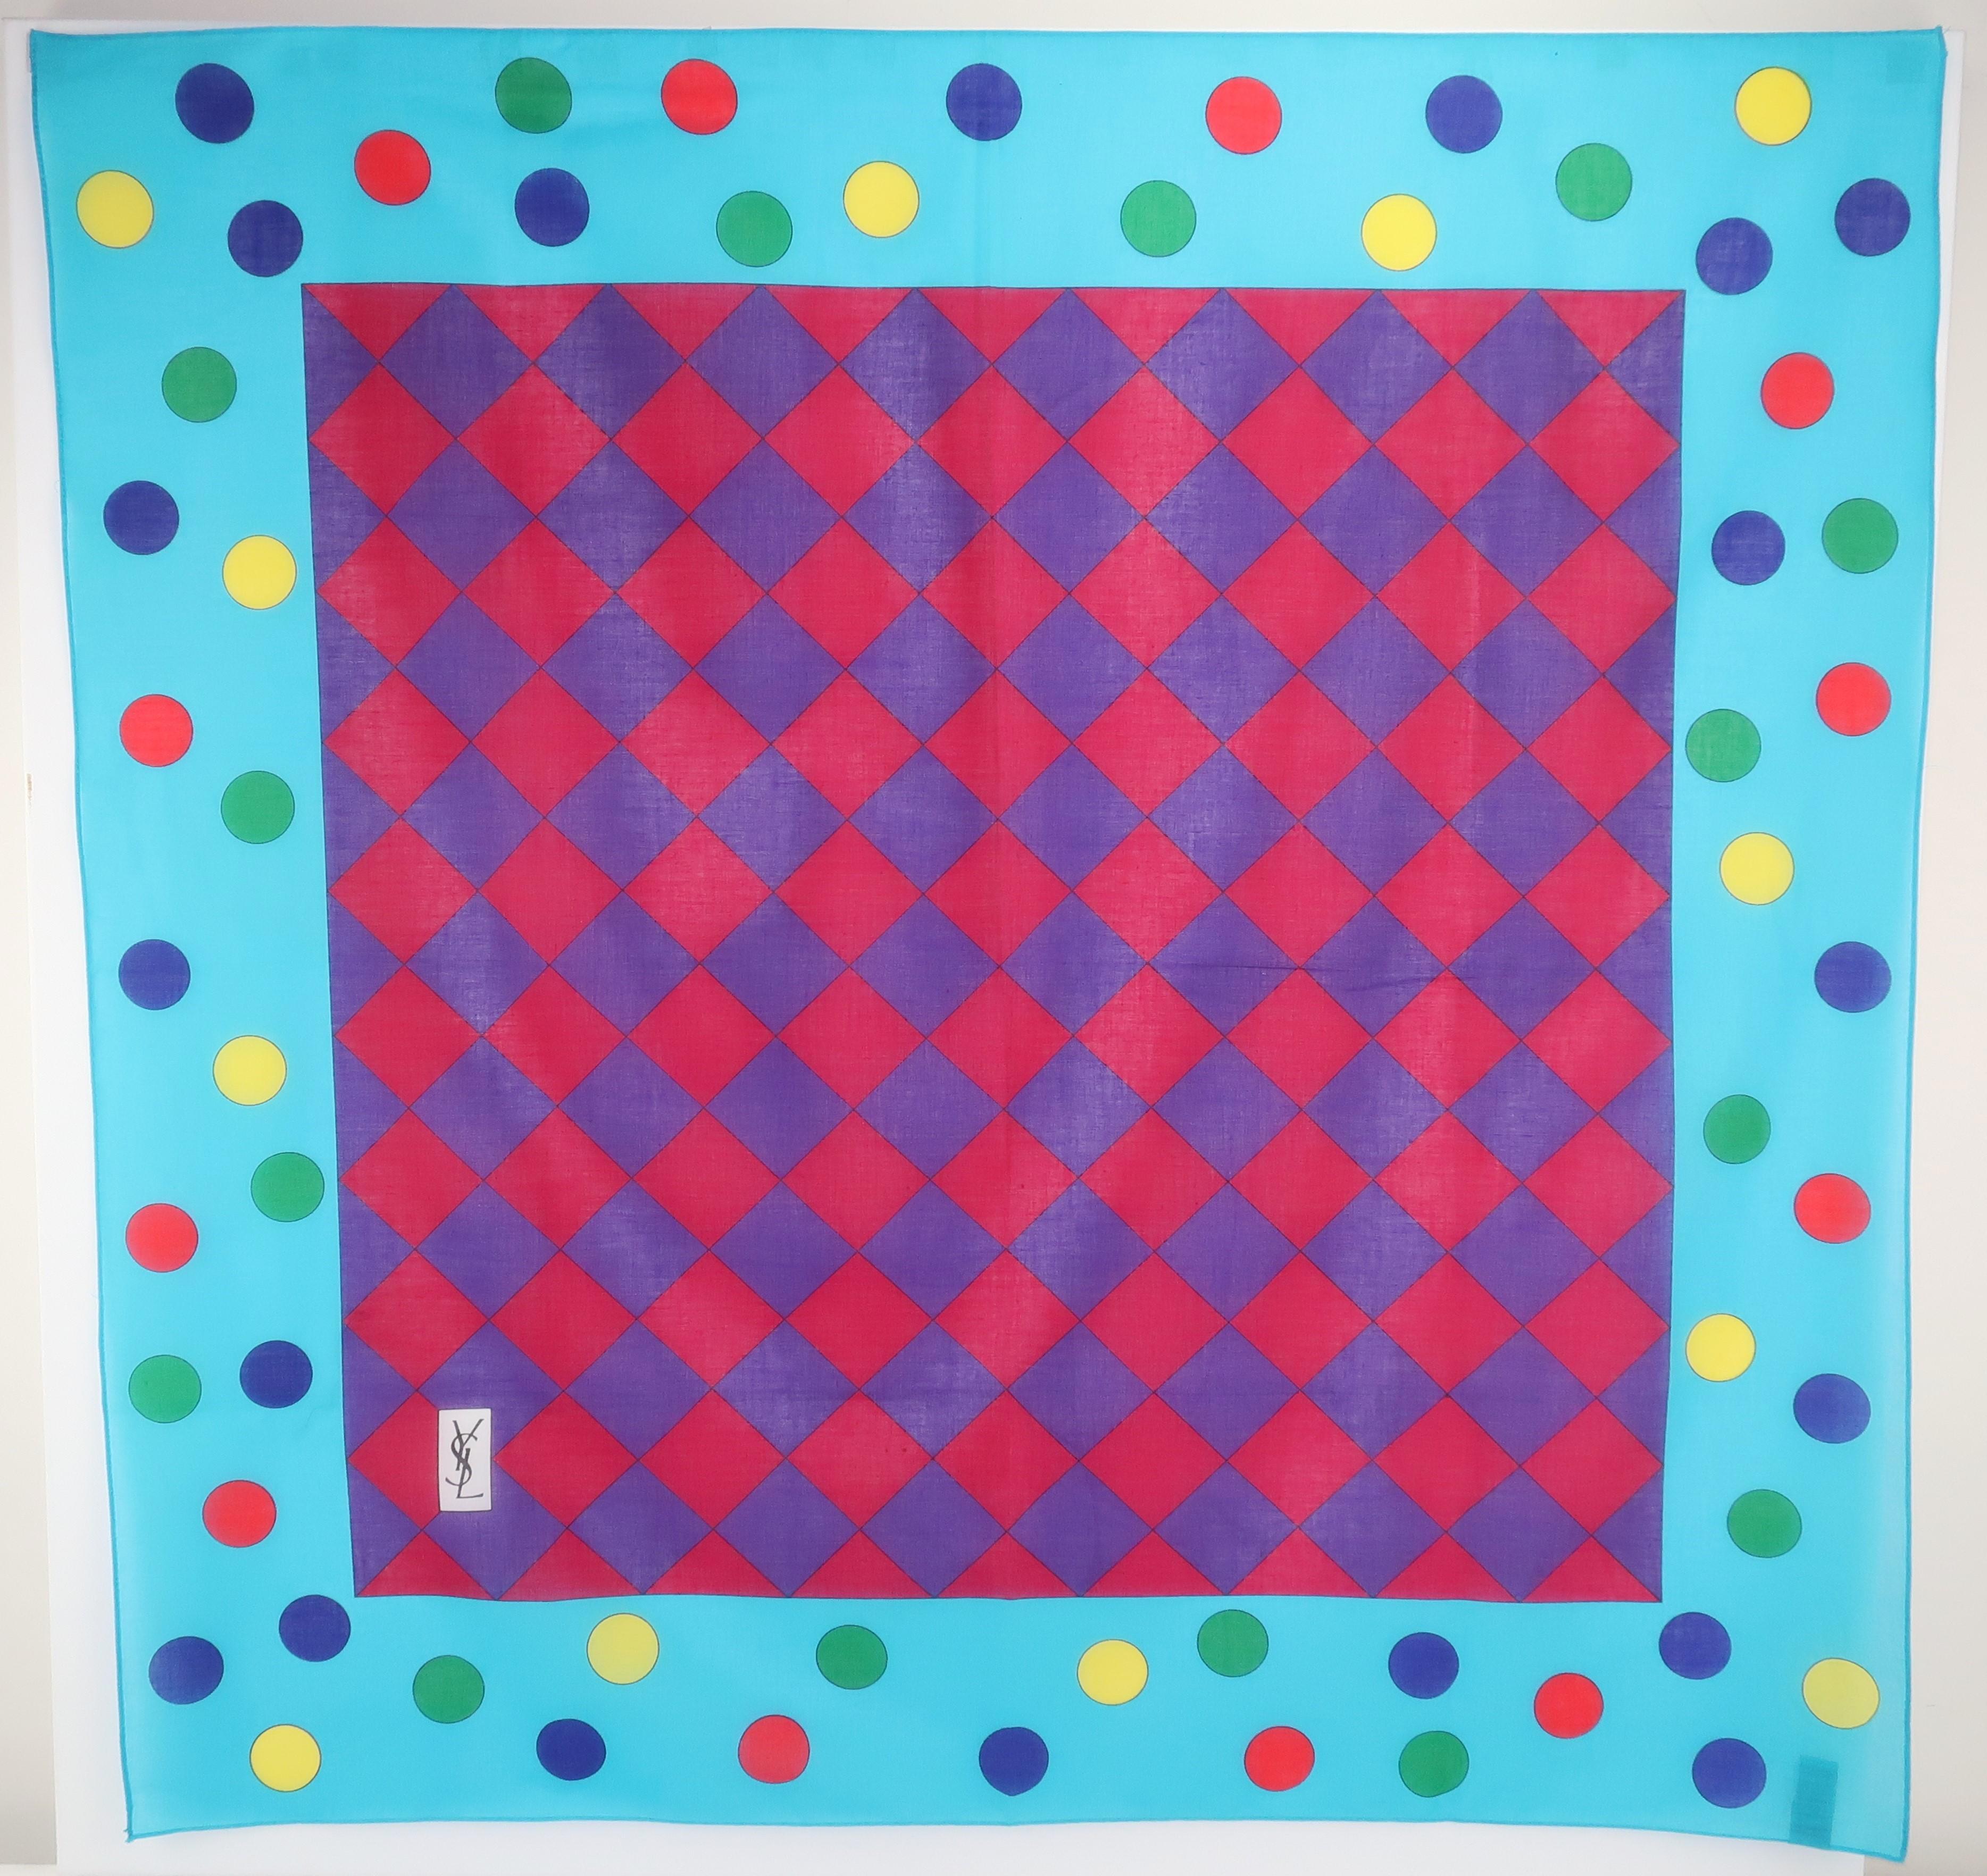 Wrap yourself in a colorful Yves Saint Laurent cotton scarf with a playful mix of polka dots and checkerboard squares all in shades of aqua blue, red, green, yellow, blue, purple and magenta.  Try mixing it with stripes for a stylish contrast or let